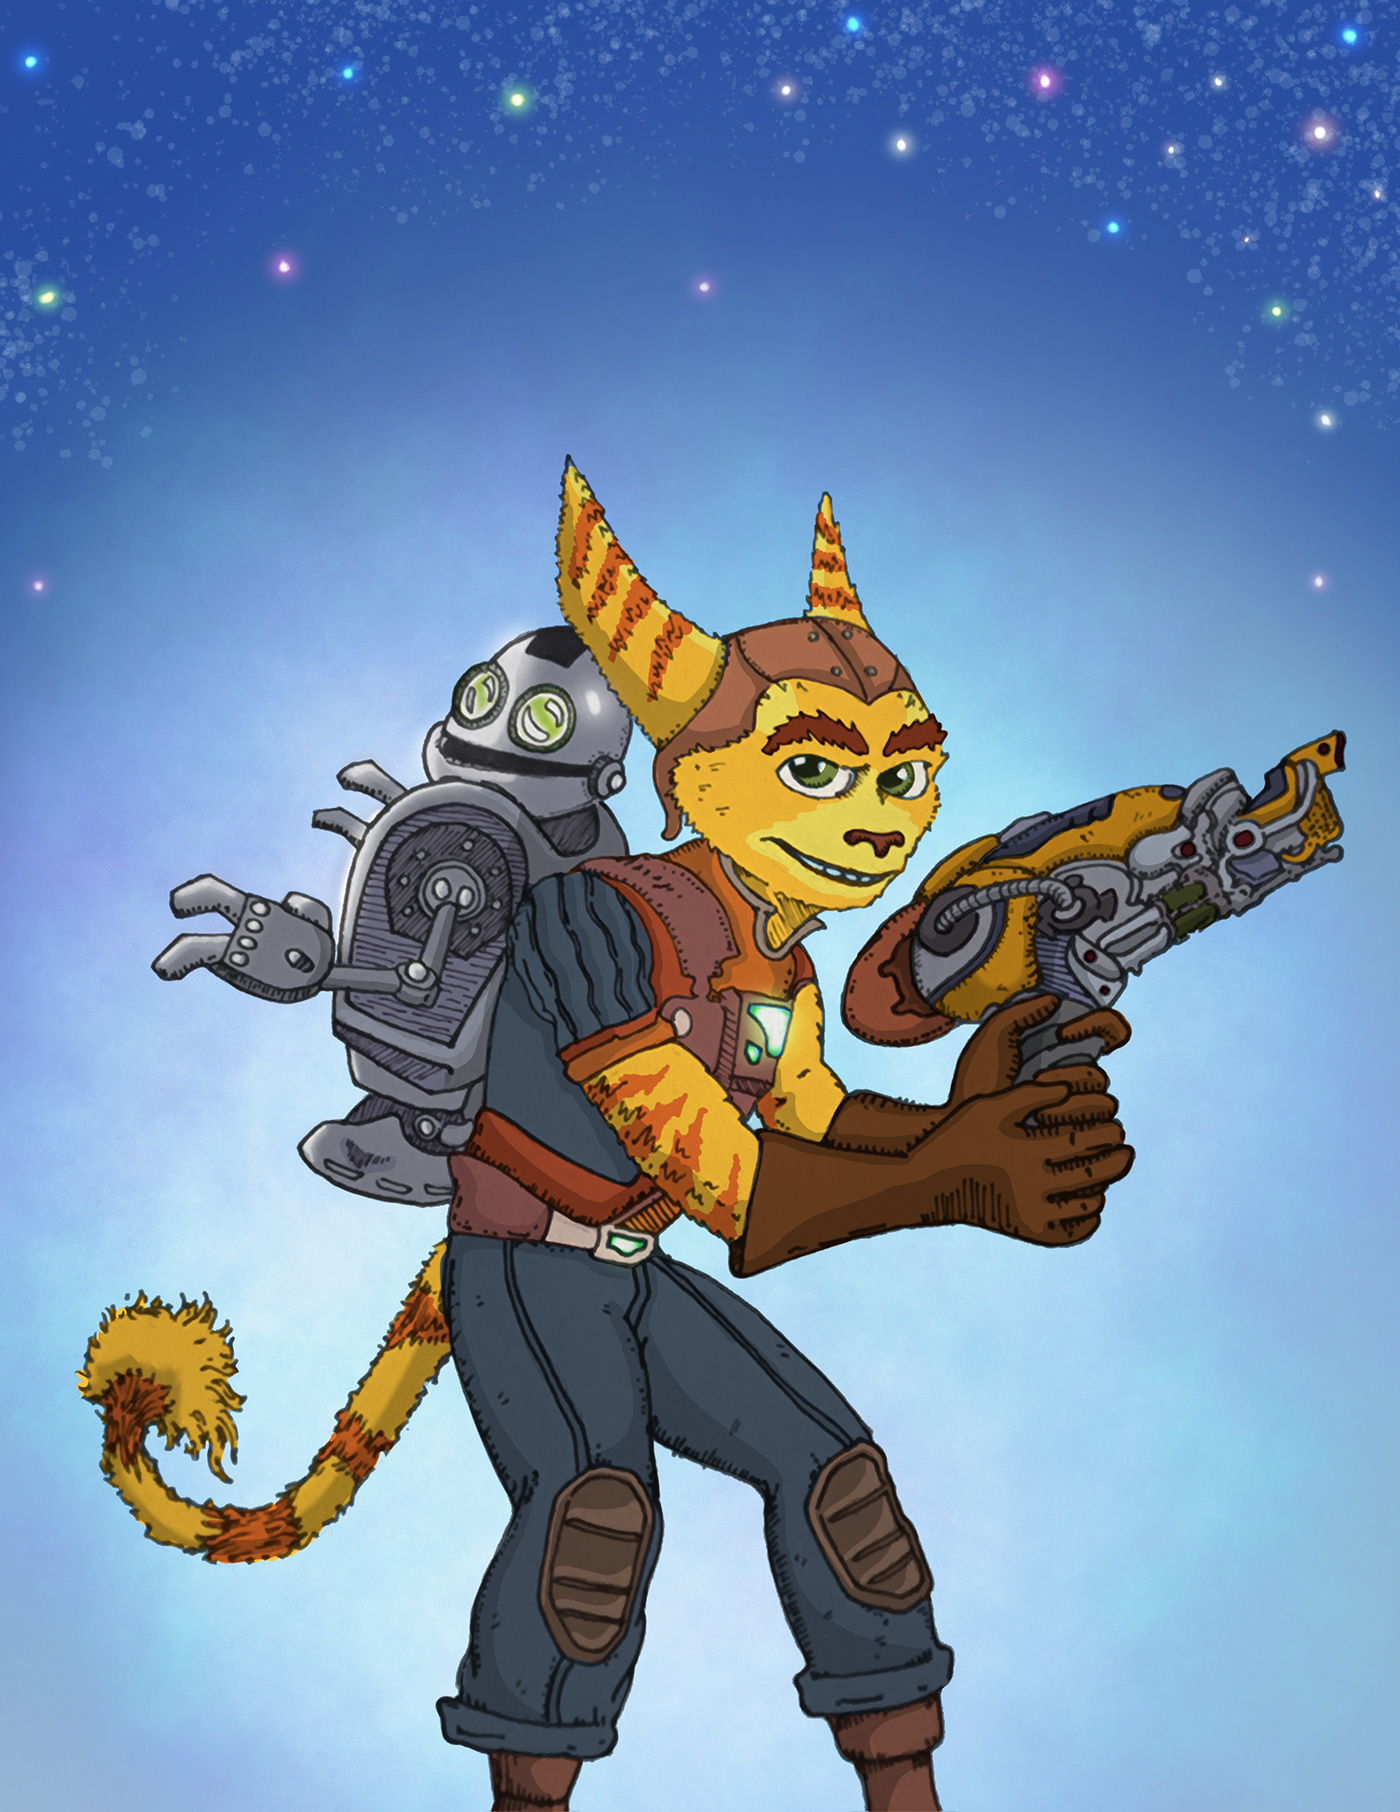 Character Ratchet & Clank Ratchet and Clank videogame